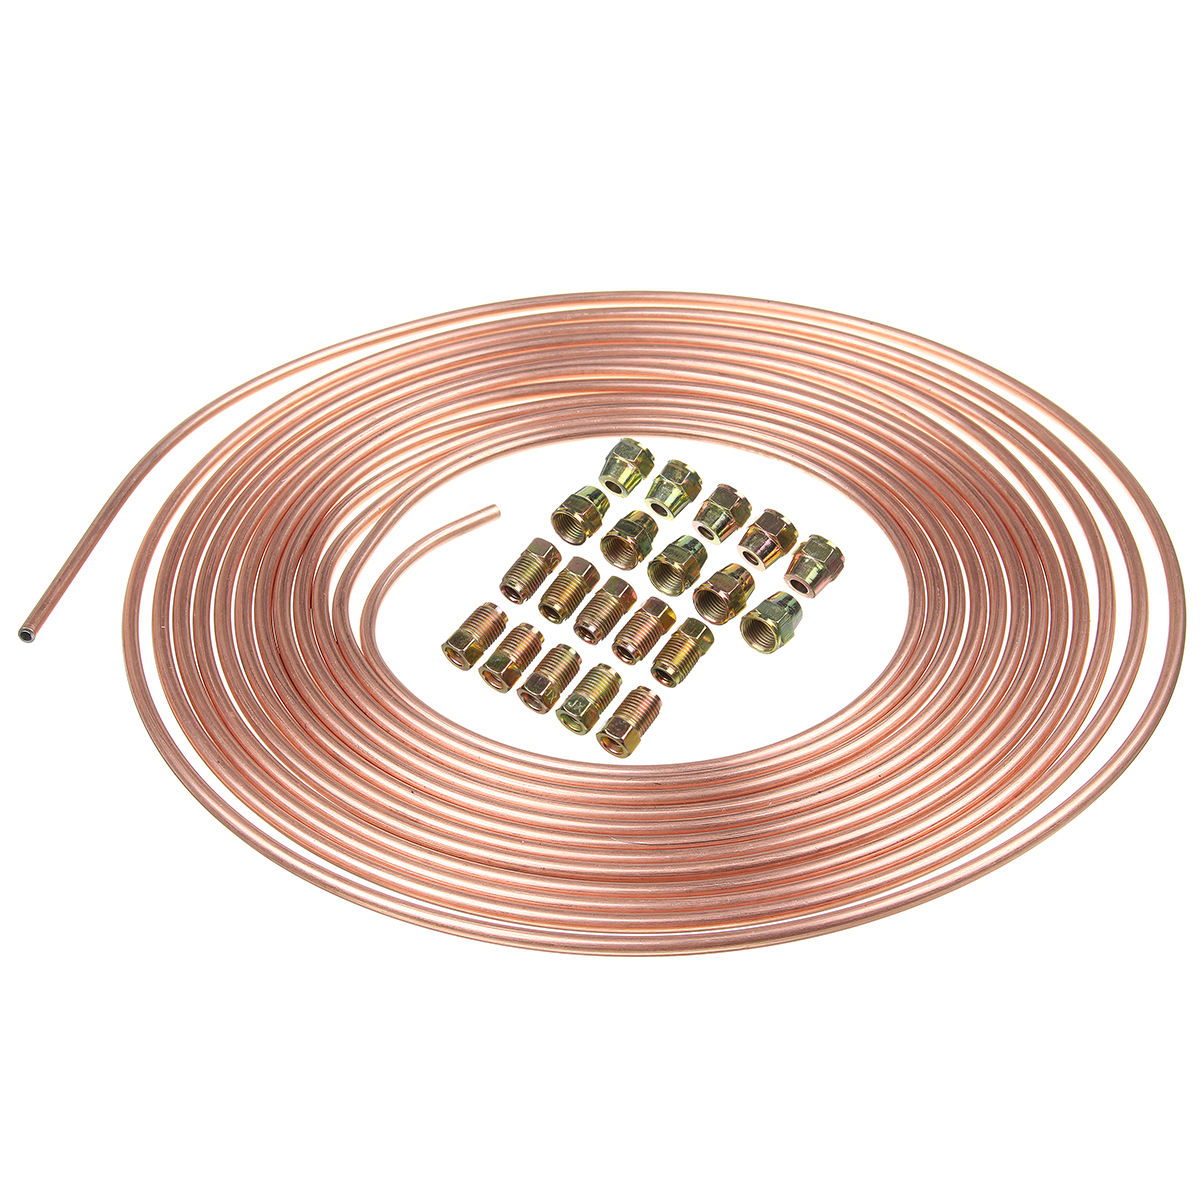 Roll-Copper-Steel-25-ft-316quot-Brake-Line-Pipe-Tubing-with-20-Pcs-Kit-Fittings-Brake-Female-Male-Nu-1543212-1